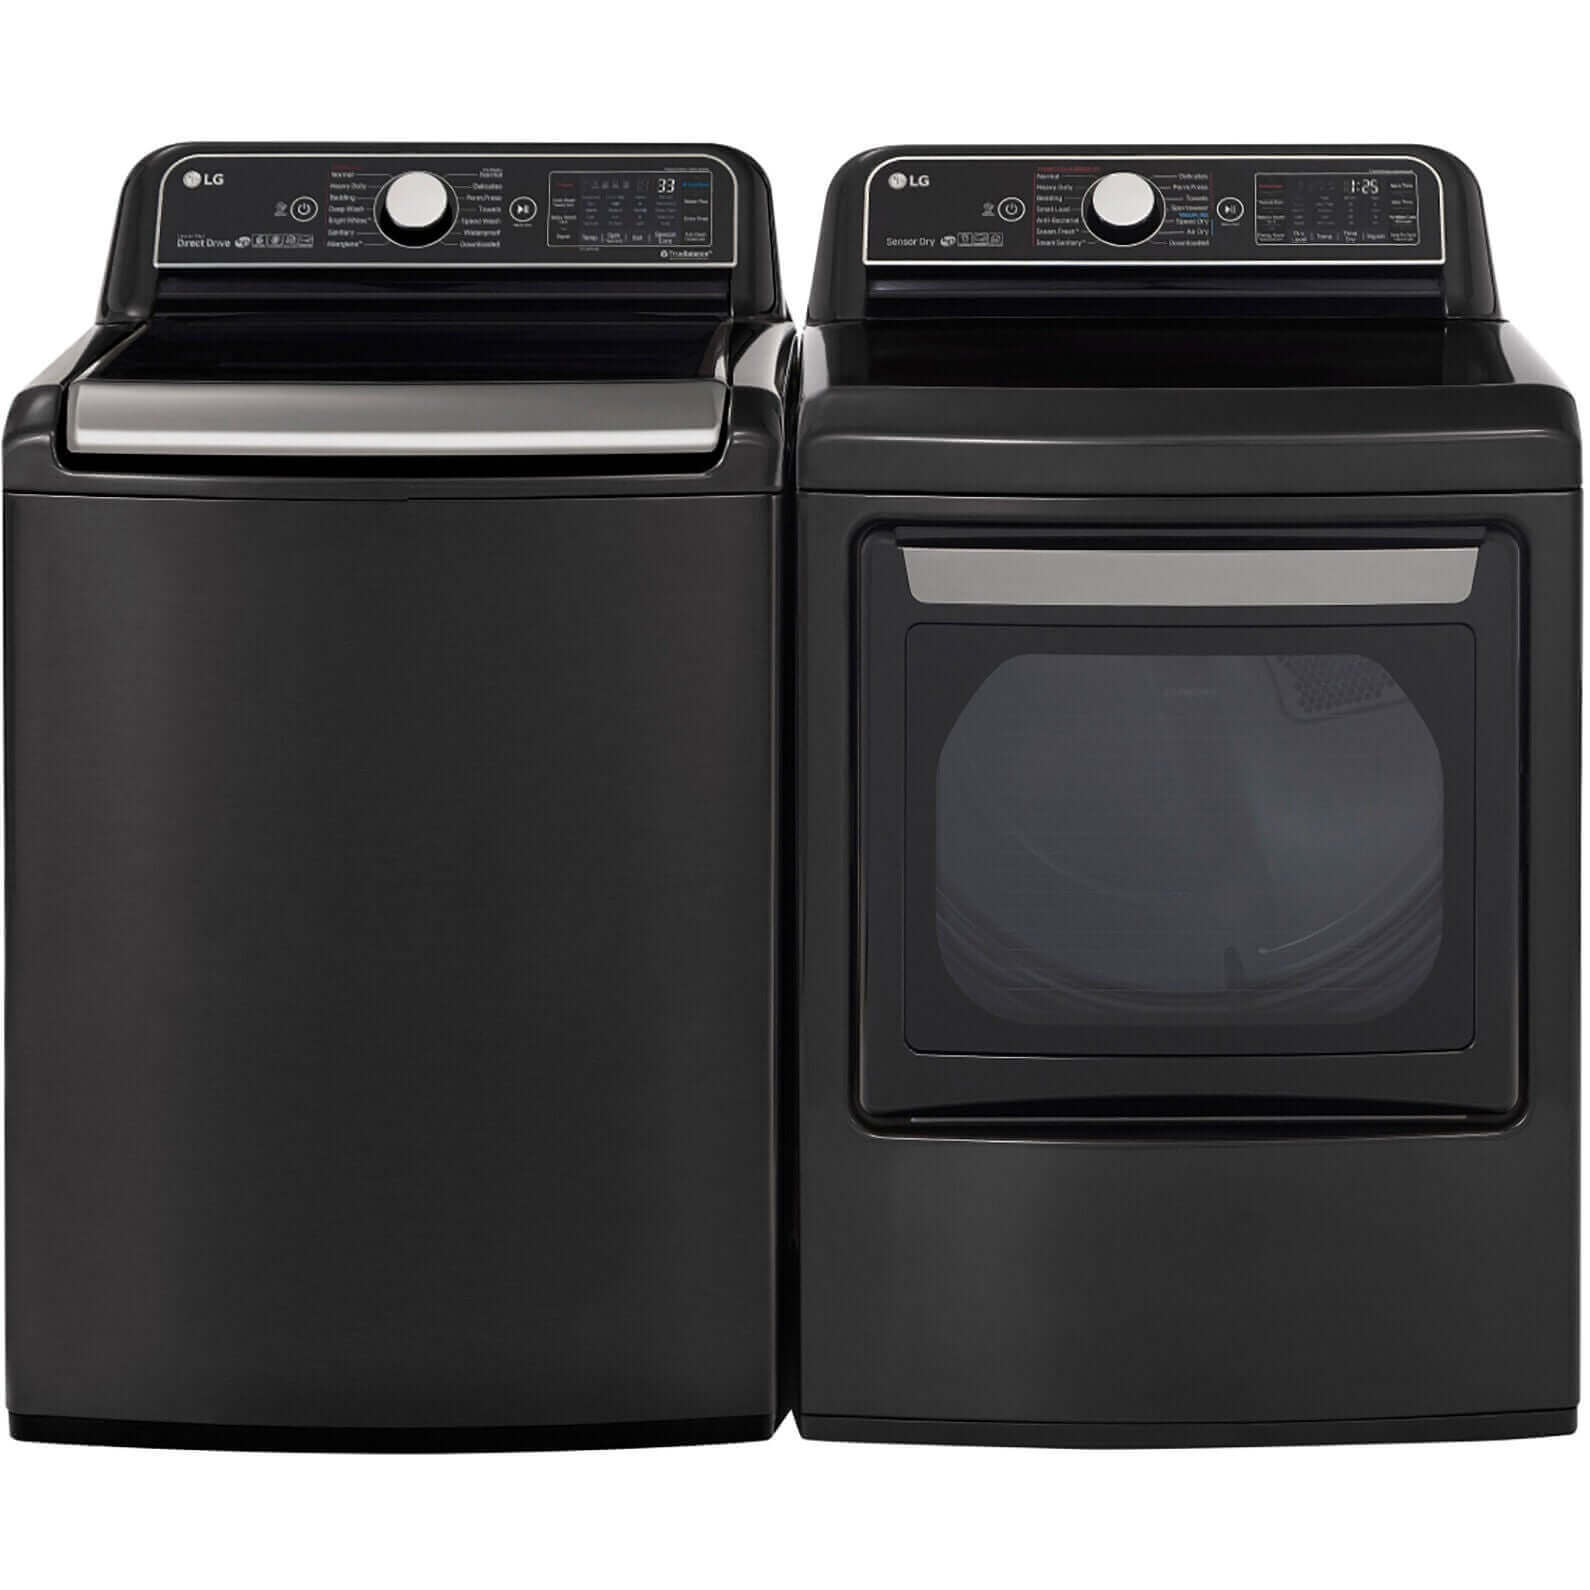 LG 27 Inch Smart wi-fi Enabled Electric Dryer with TurboSteam In Black Steel 7.3 cu. ft. (DLEX7900BE)